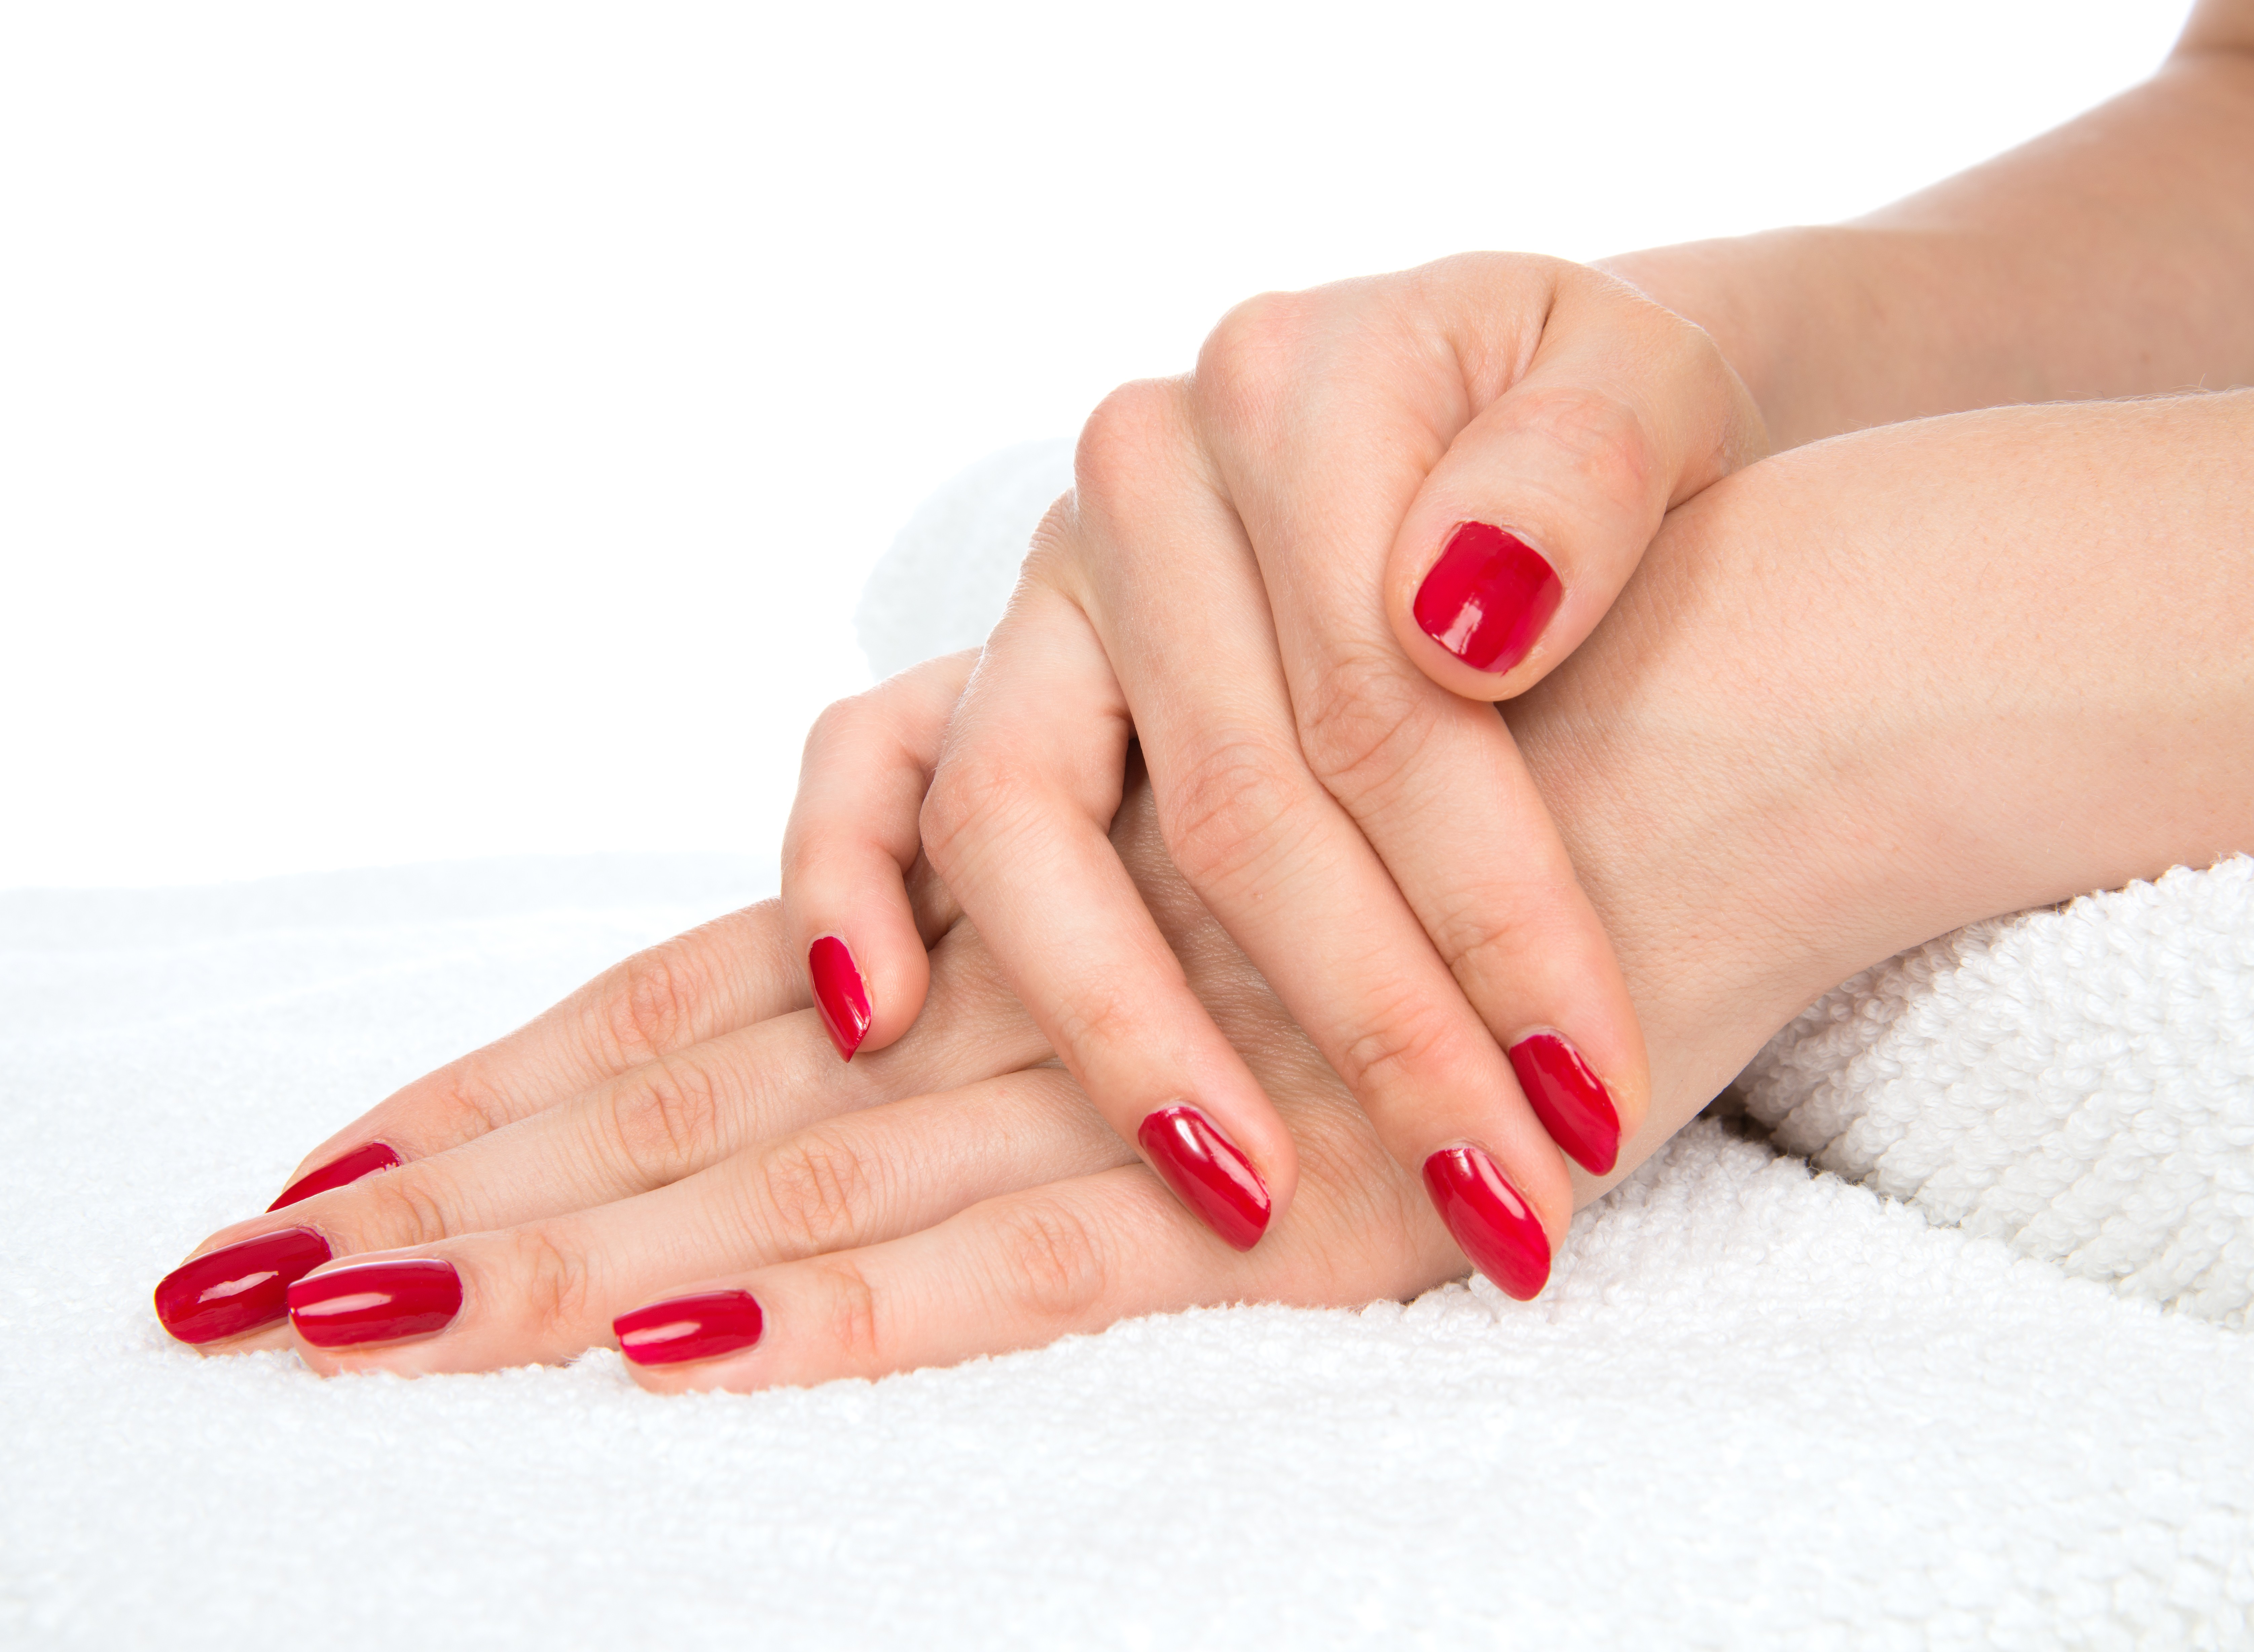 Red nails look best on youthful hands.